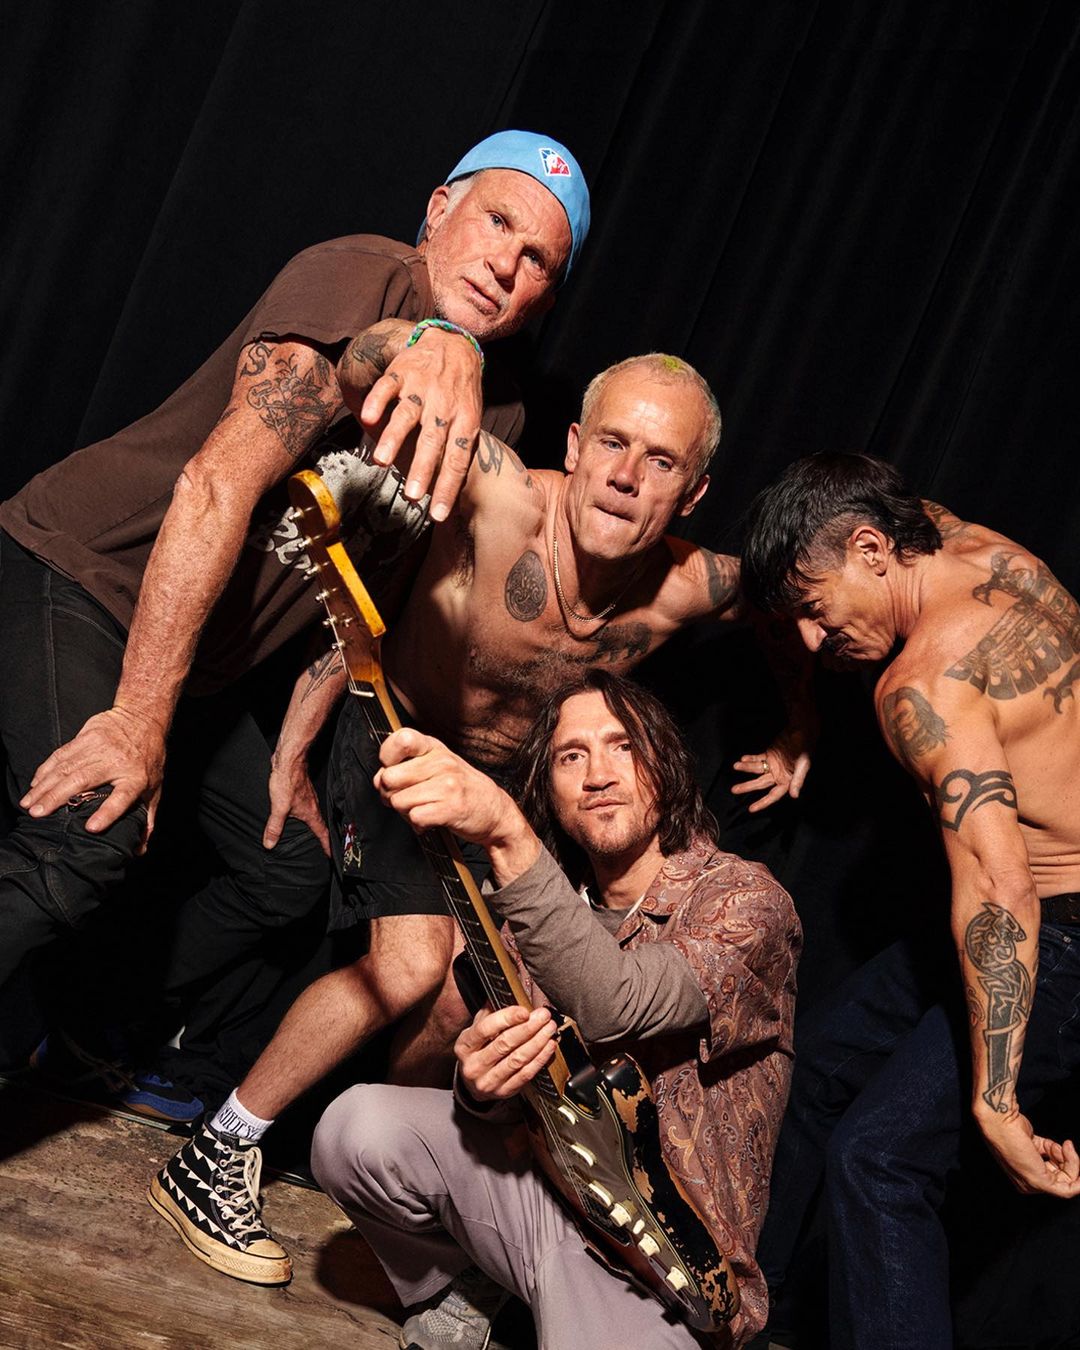 Red Hot Chilli Peppers vuelve a la Argentina (Foto: Gentileza Red Hot Chilli Peppers)